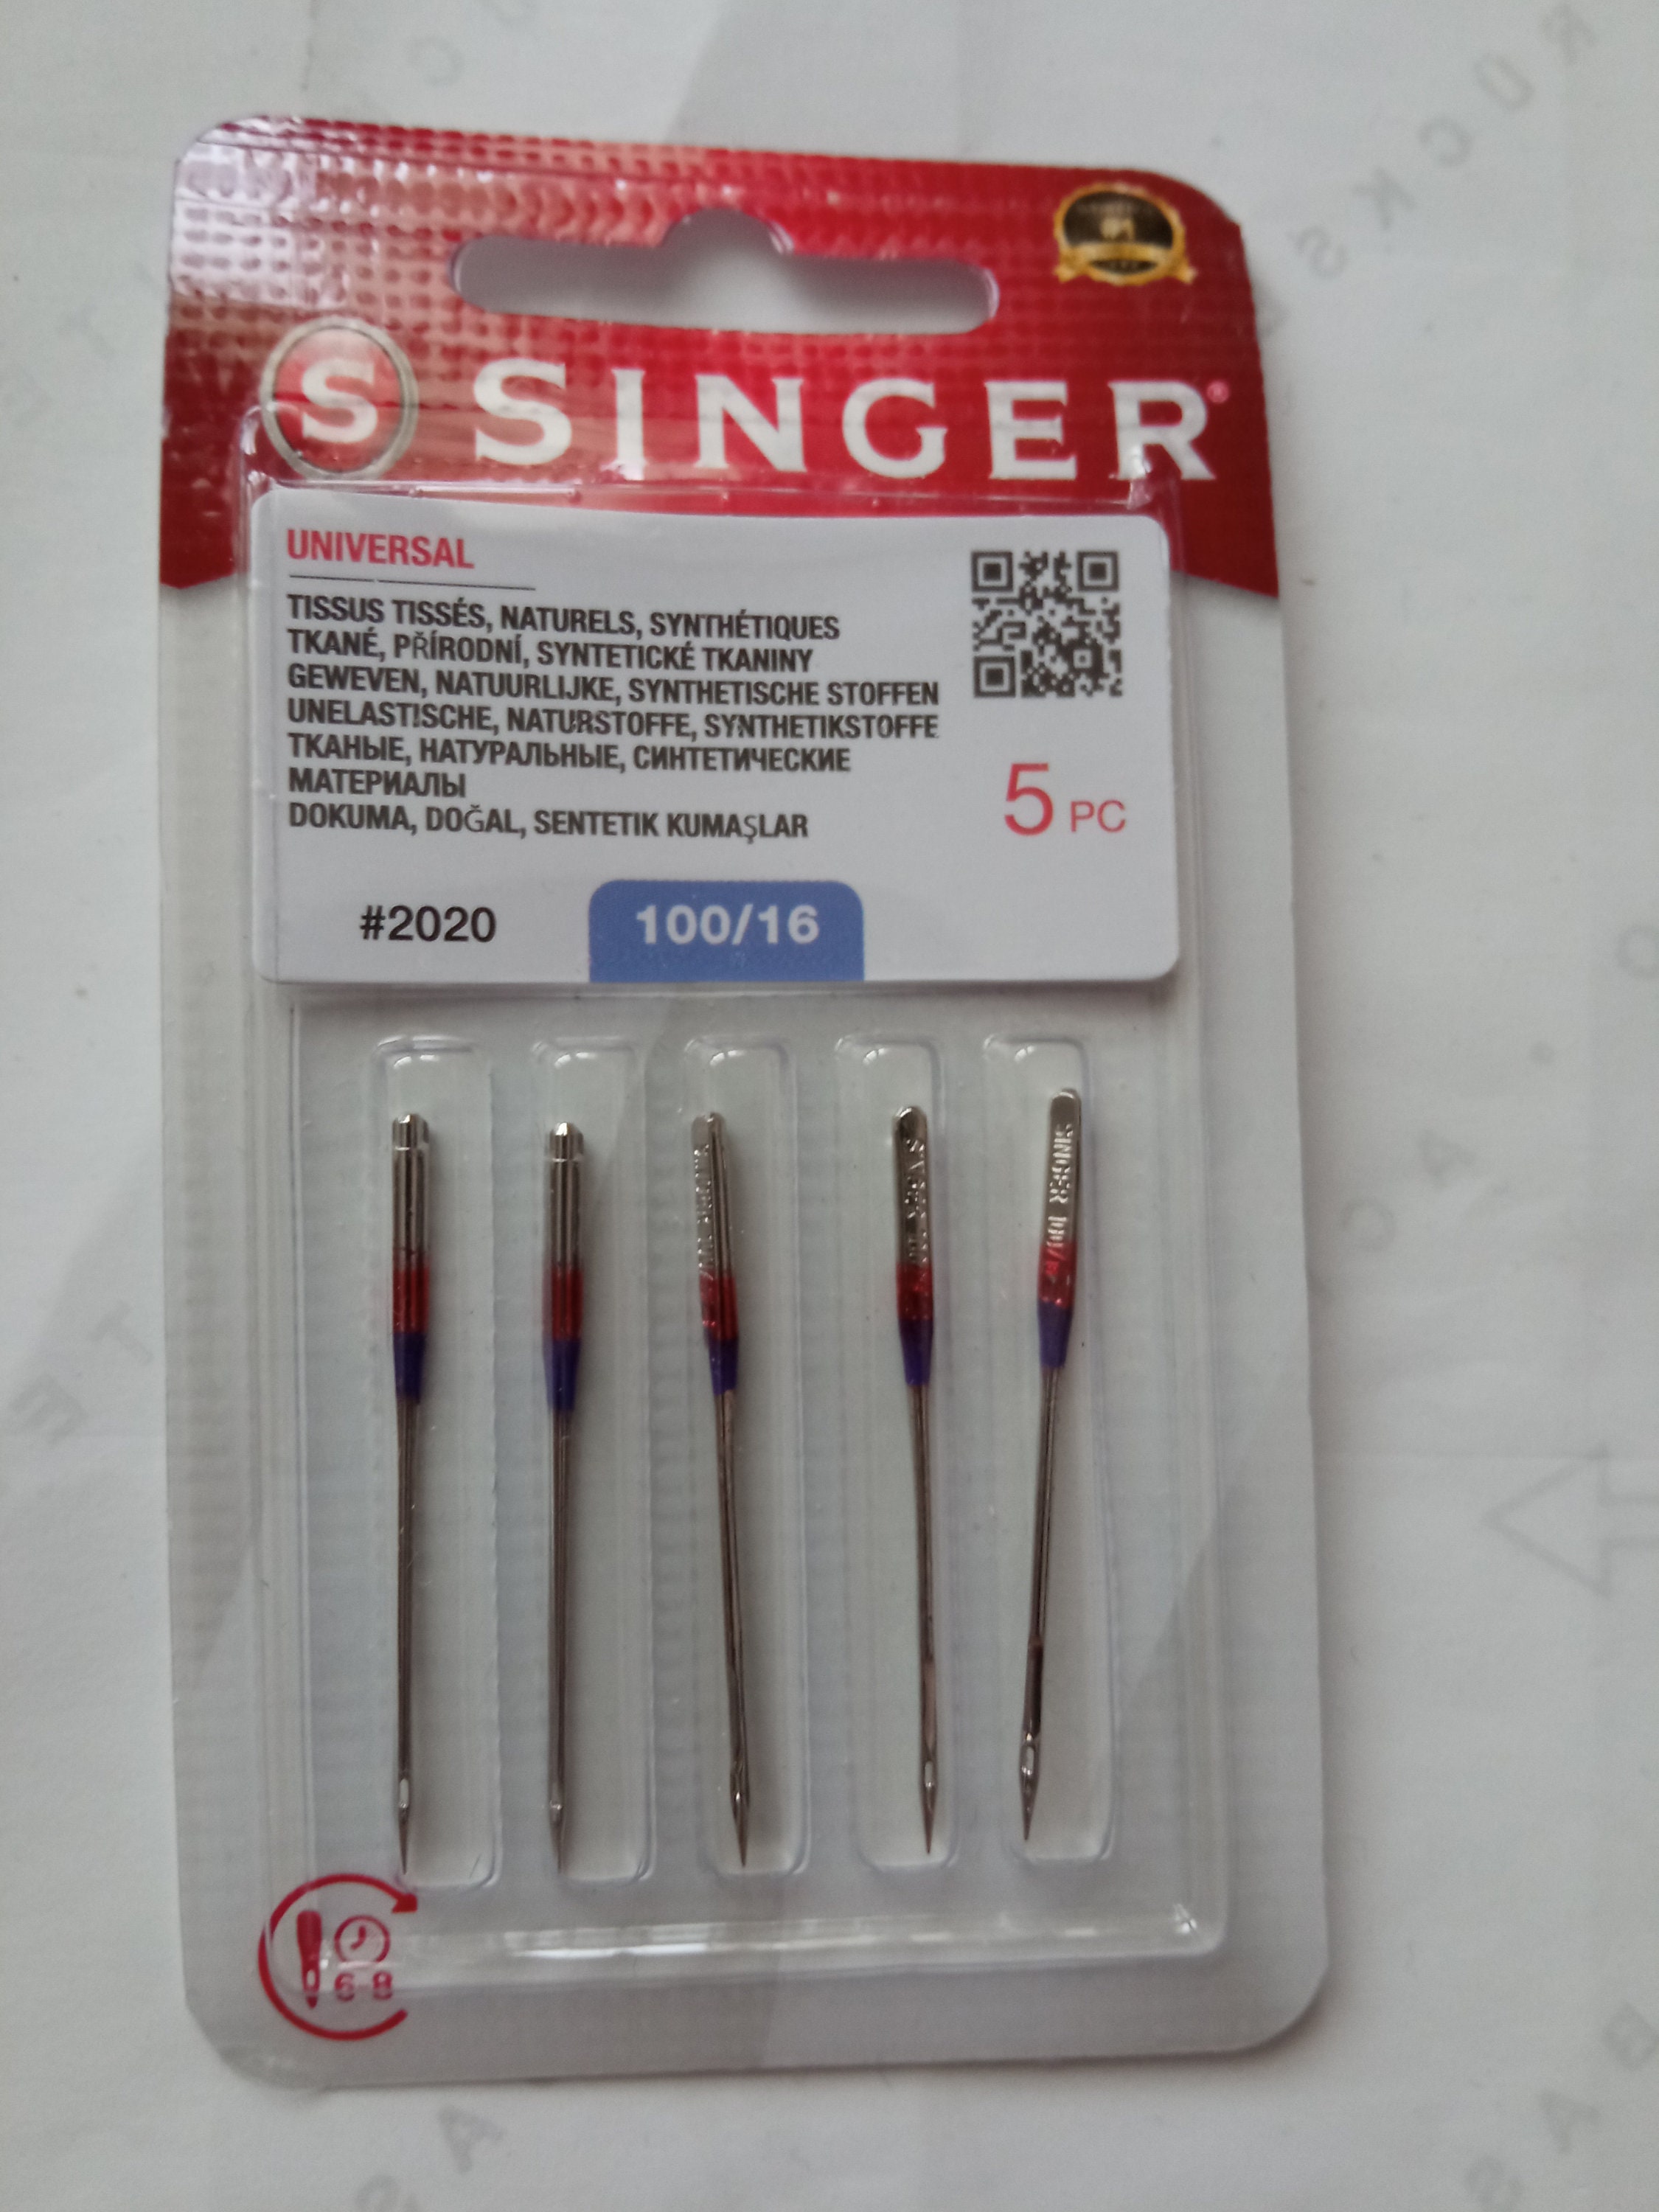 Singer jeans needle for sewing machine size 2026/90 and 100